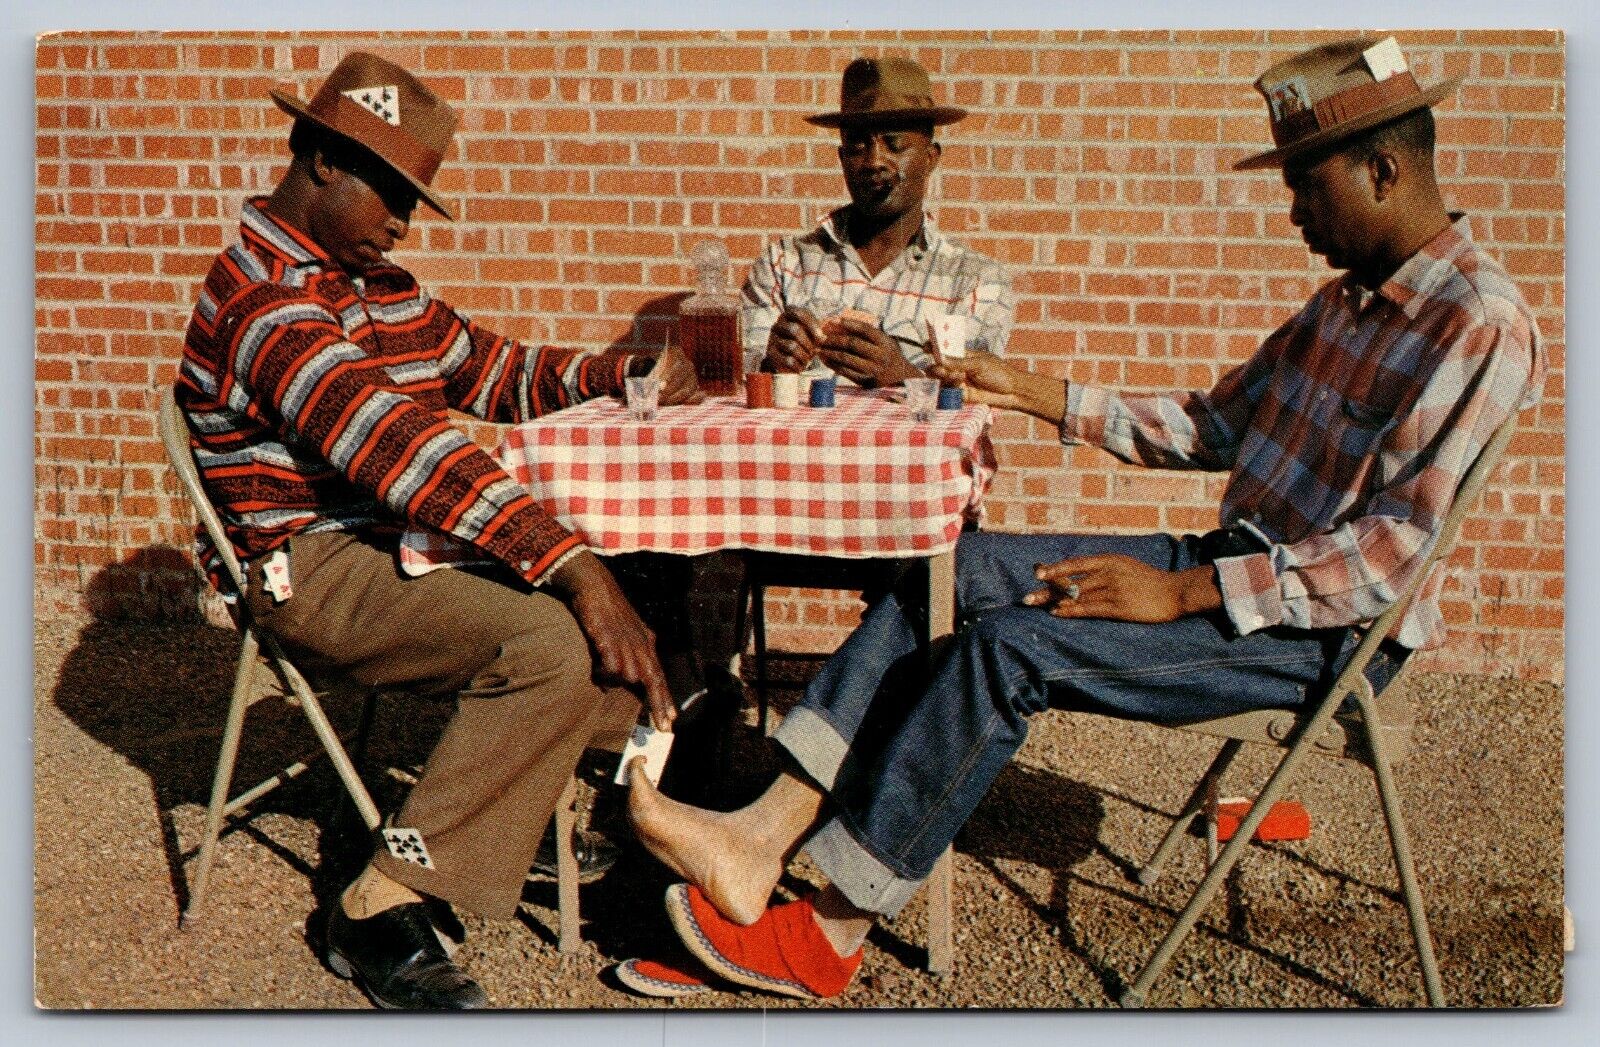 C1960? A SKIN GAME 3 young black men play cards & cheat BAXTONE TEXAS